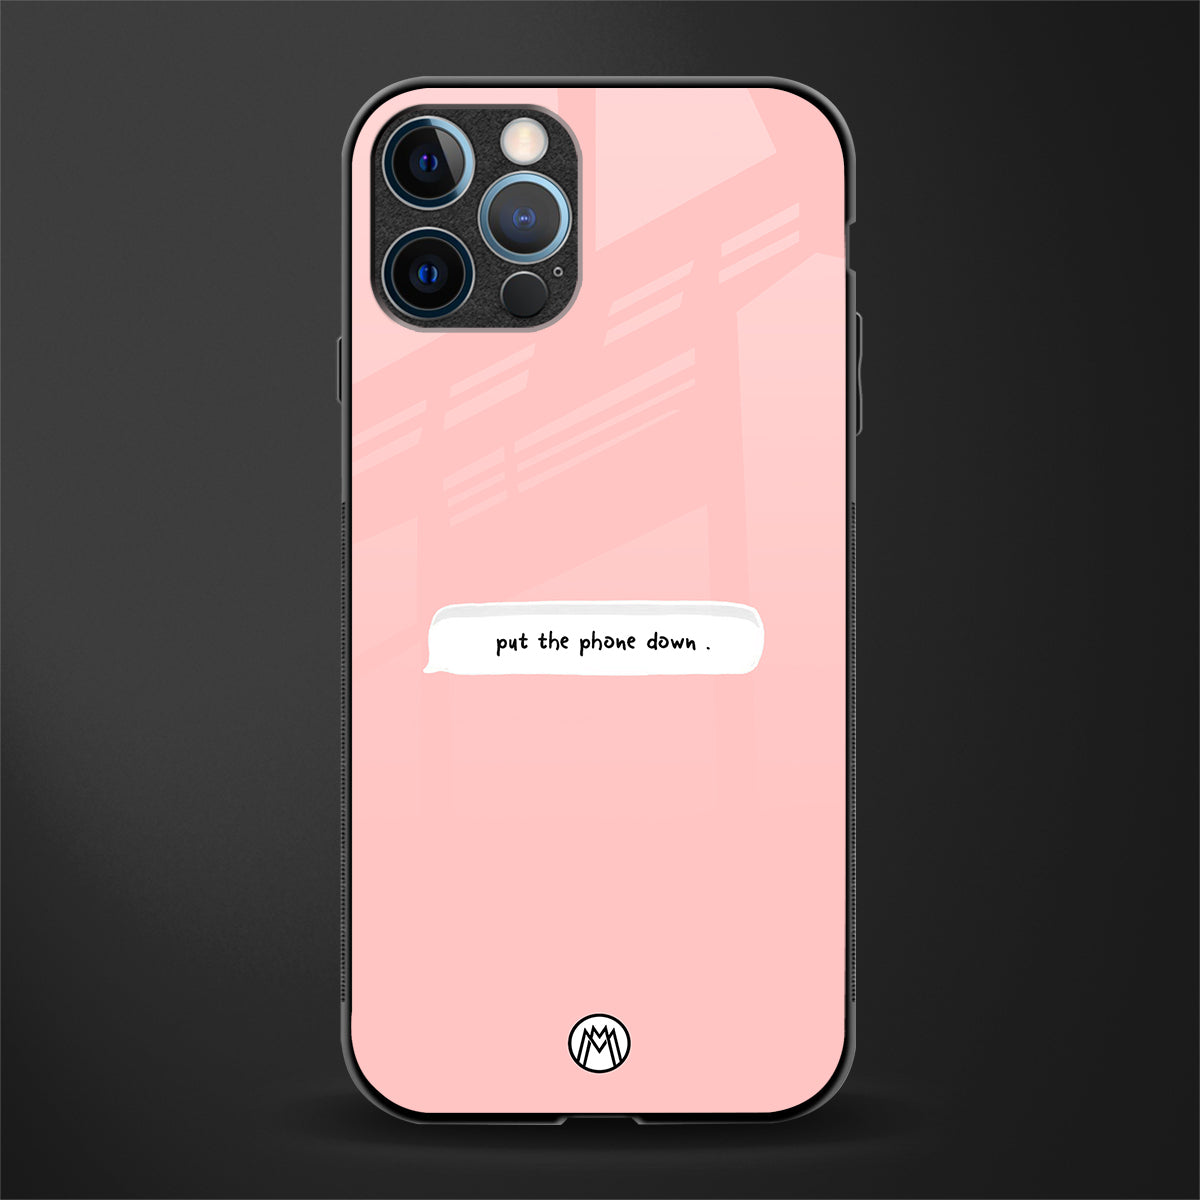 put the phone down glass case for iphone 12 pro max image